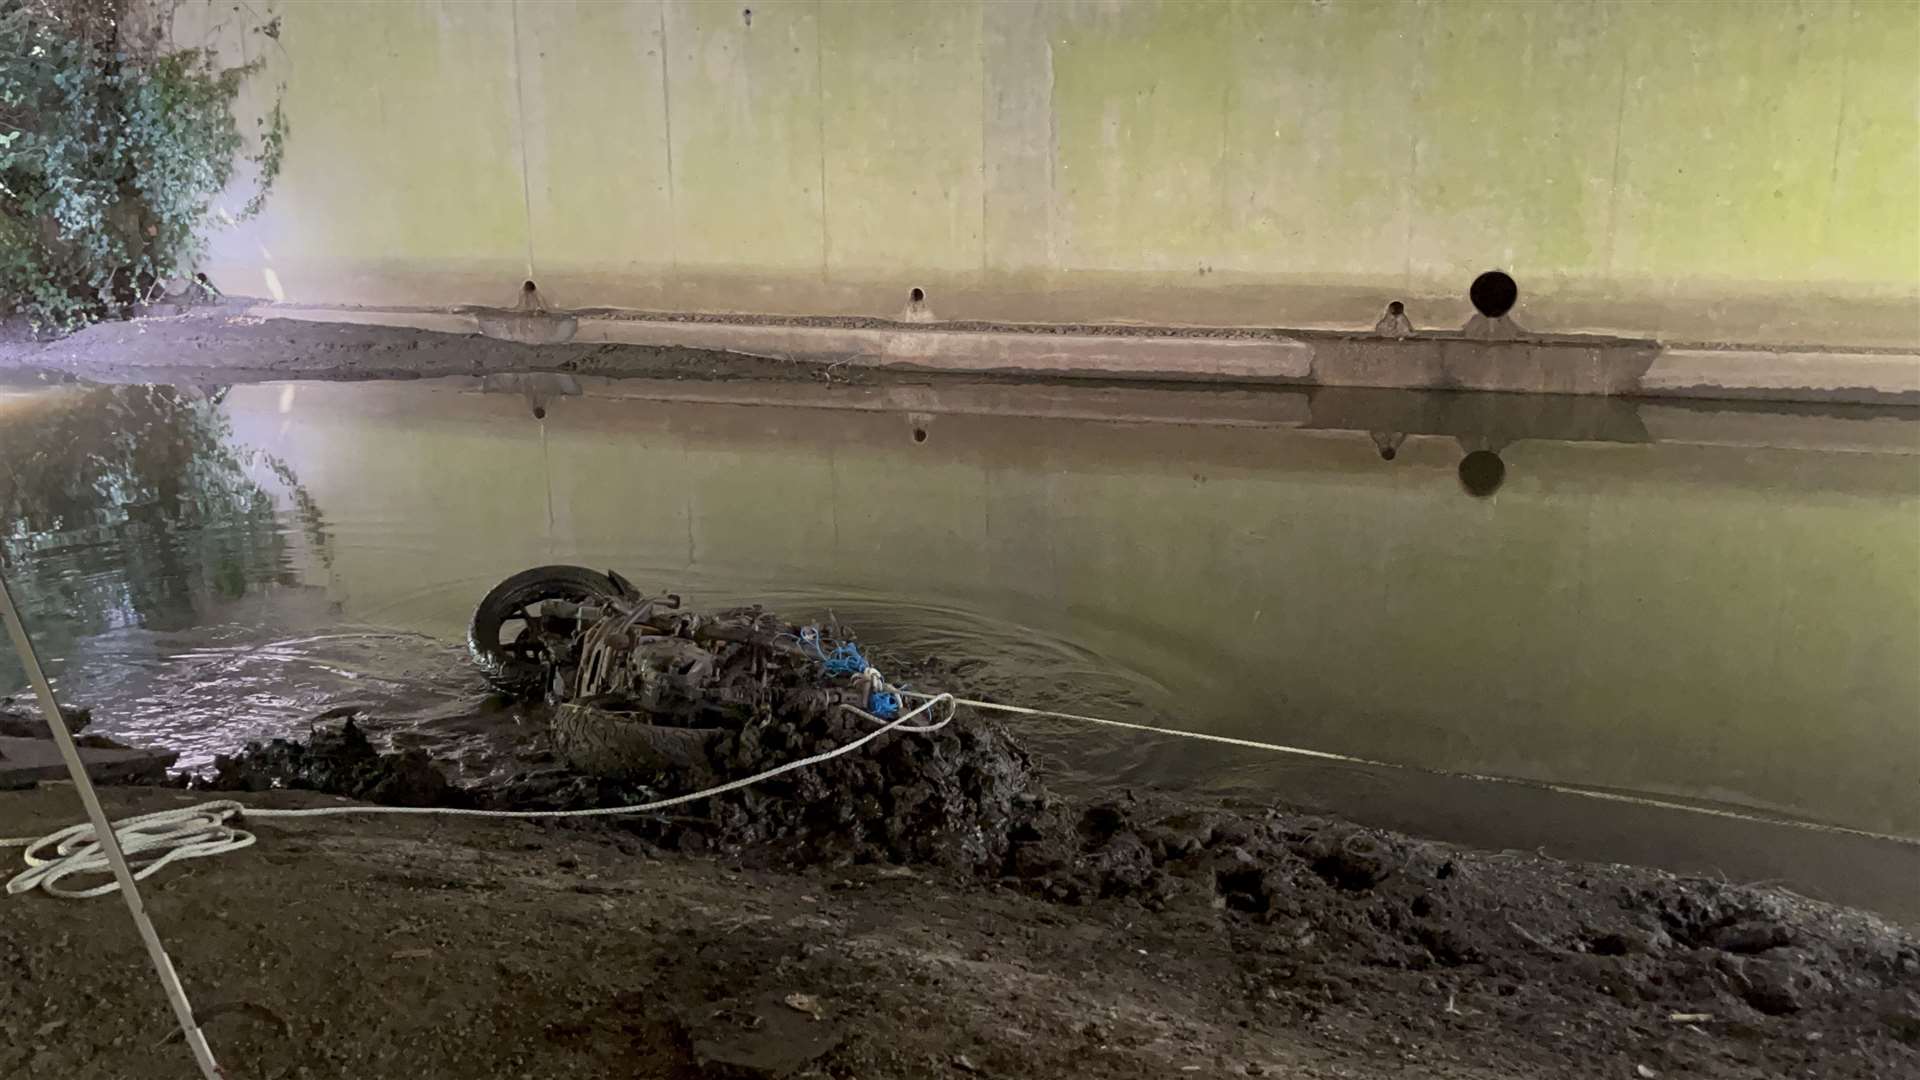 The most shocking find was a motorbike under the bridge opposite the council offices